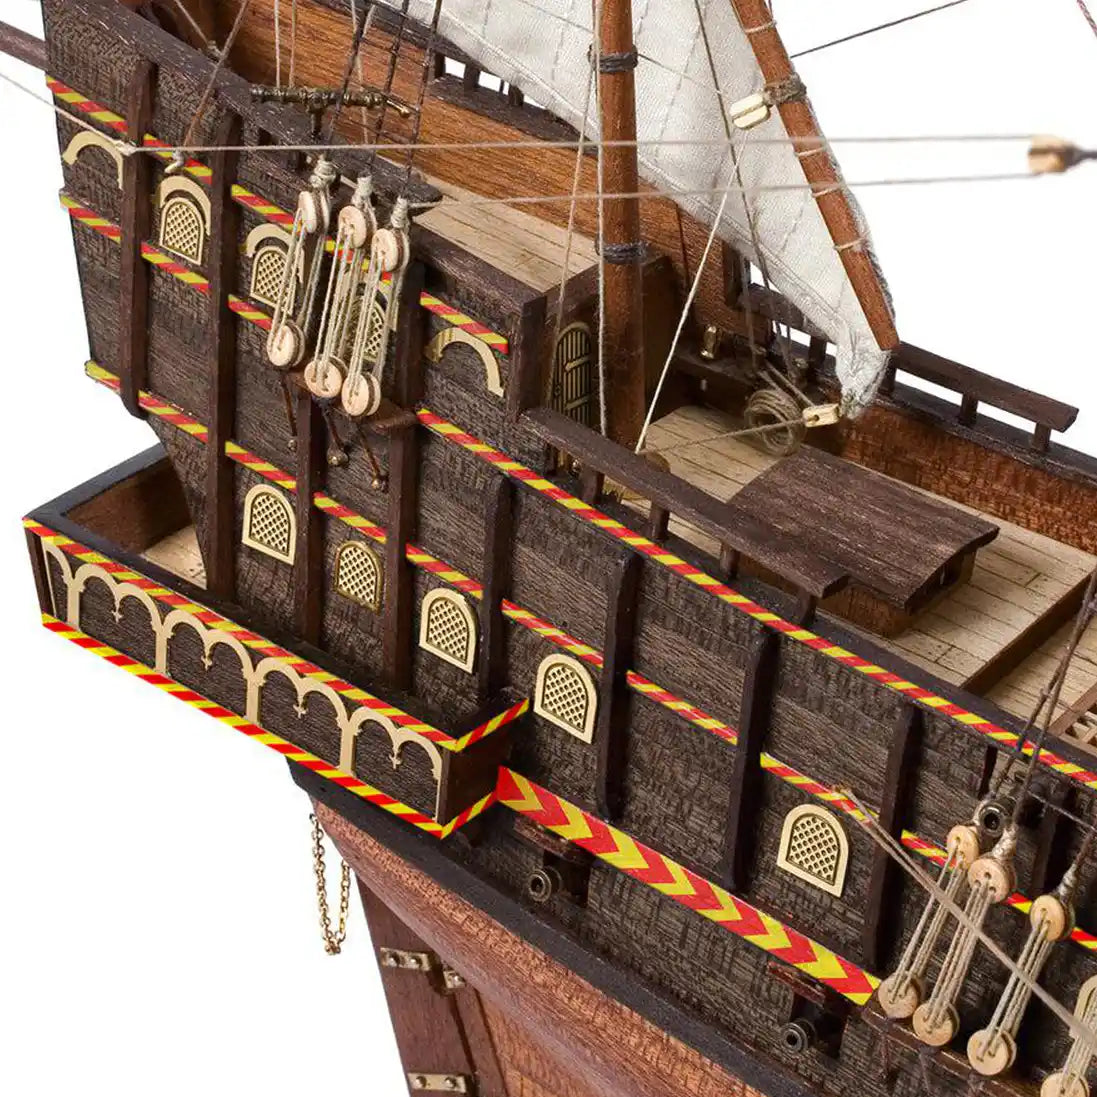 Galleon Golden Hind, aus Sir Francis Drake. – OcCre